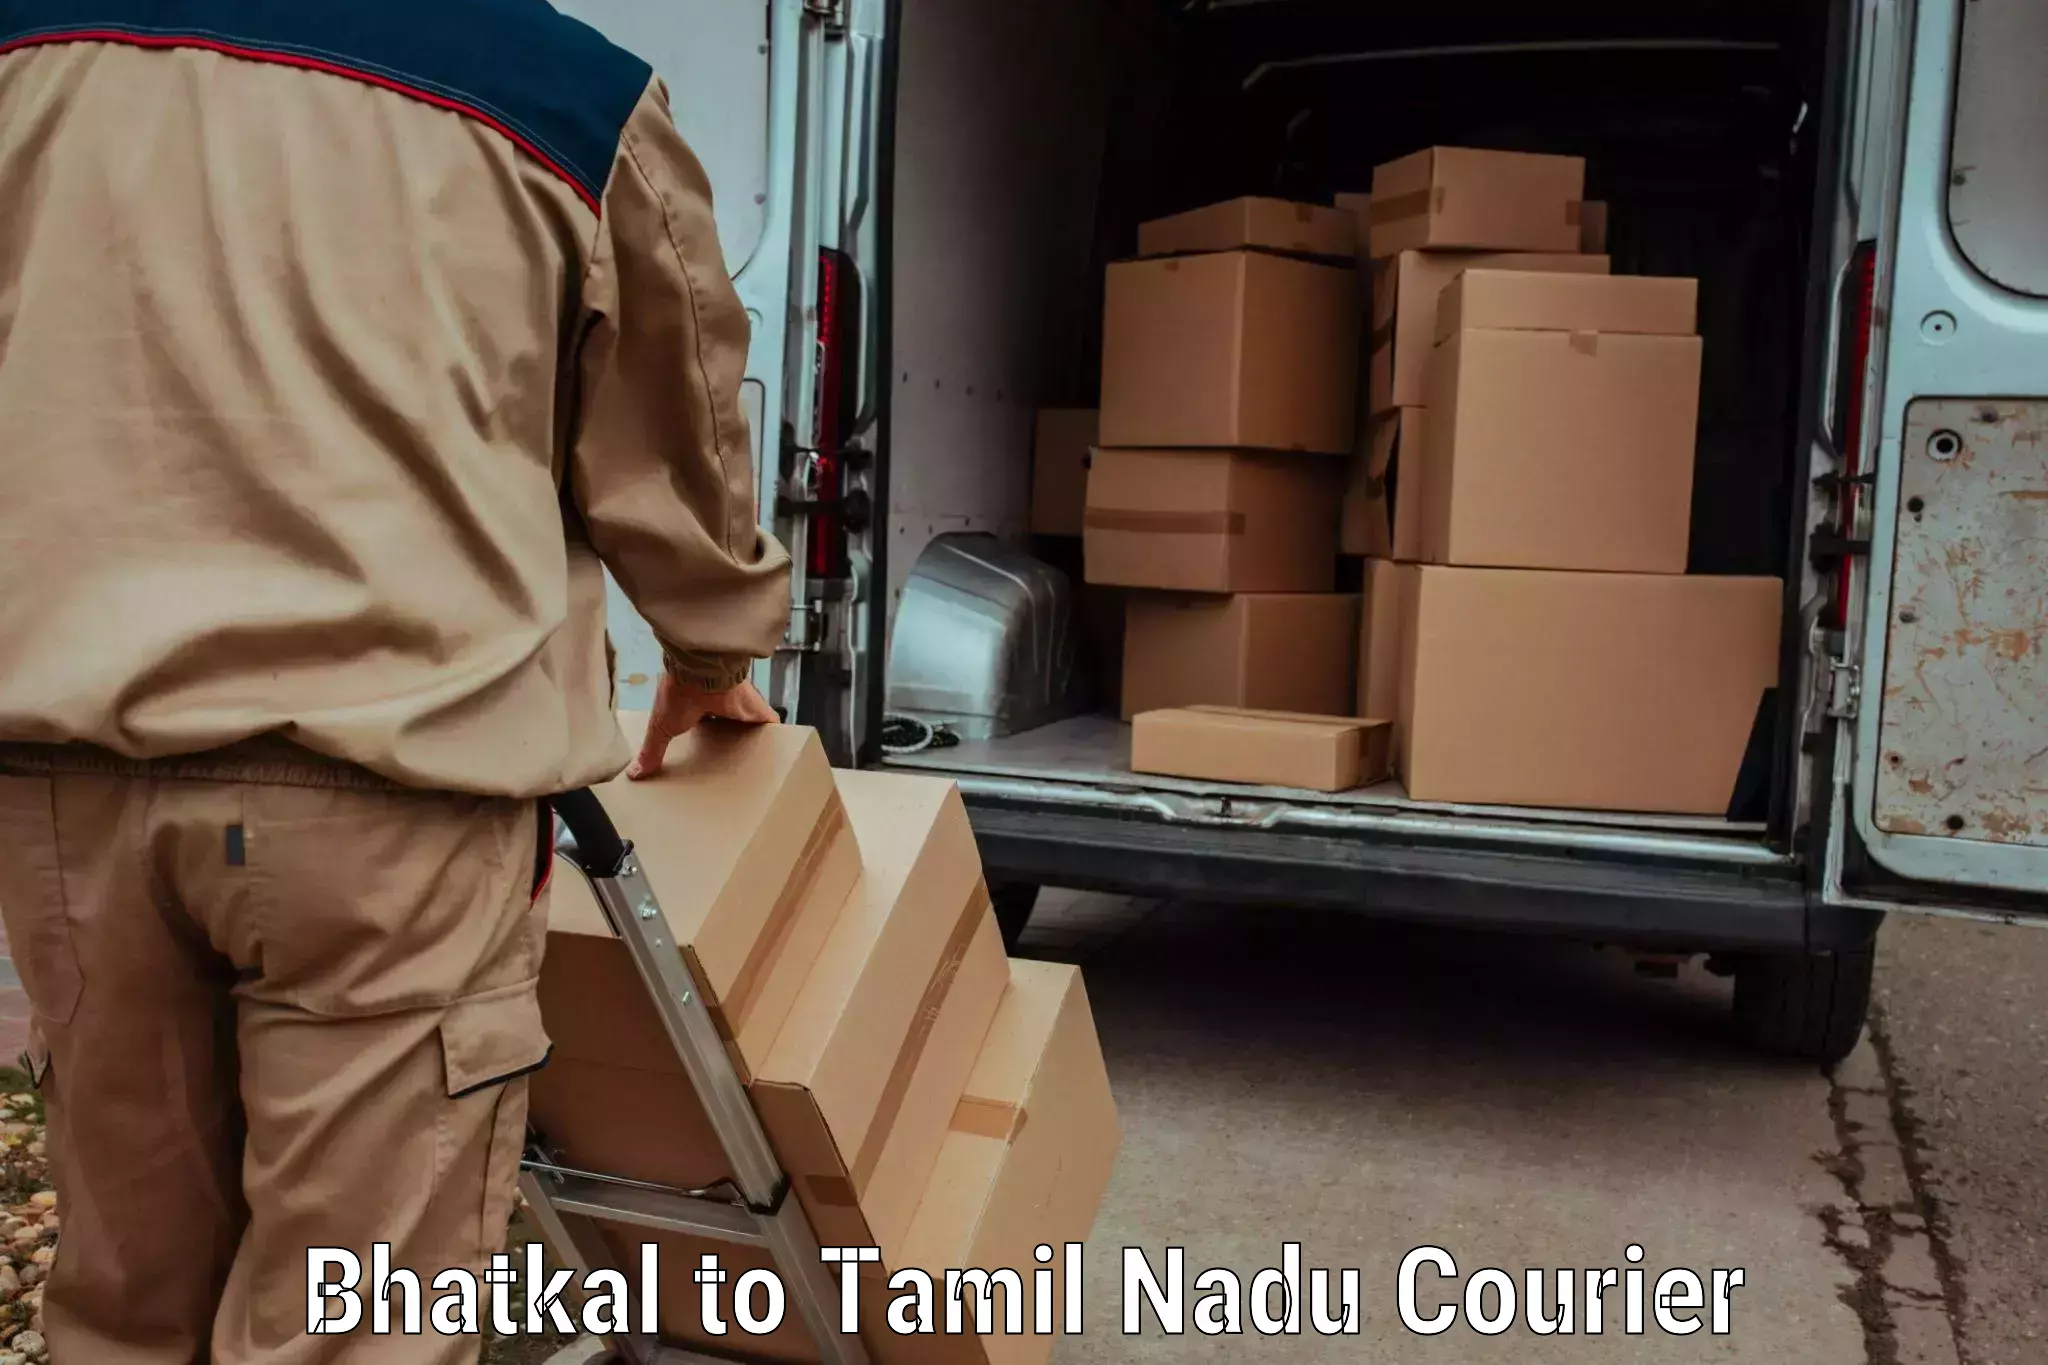 Courier membership Bhatkal to Annur